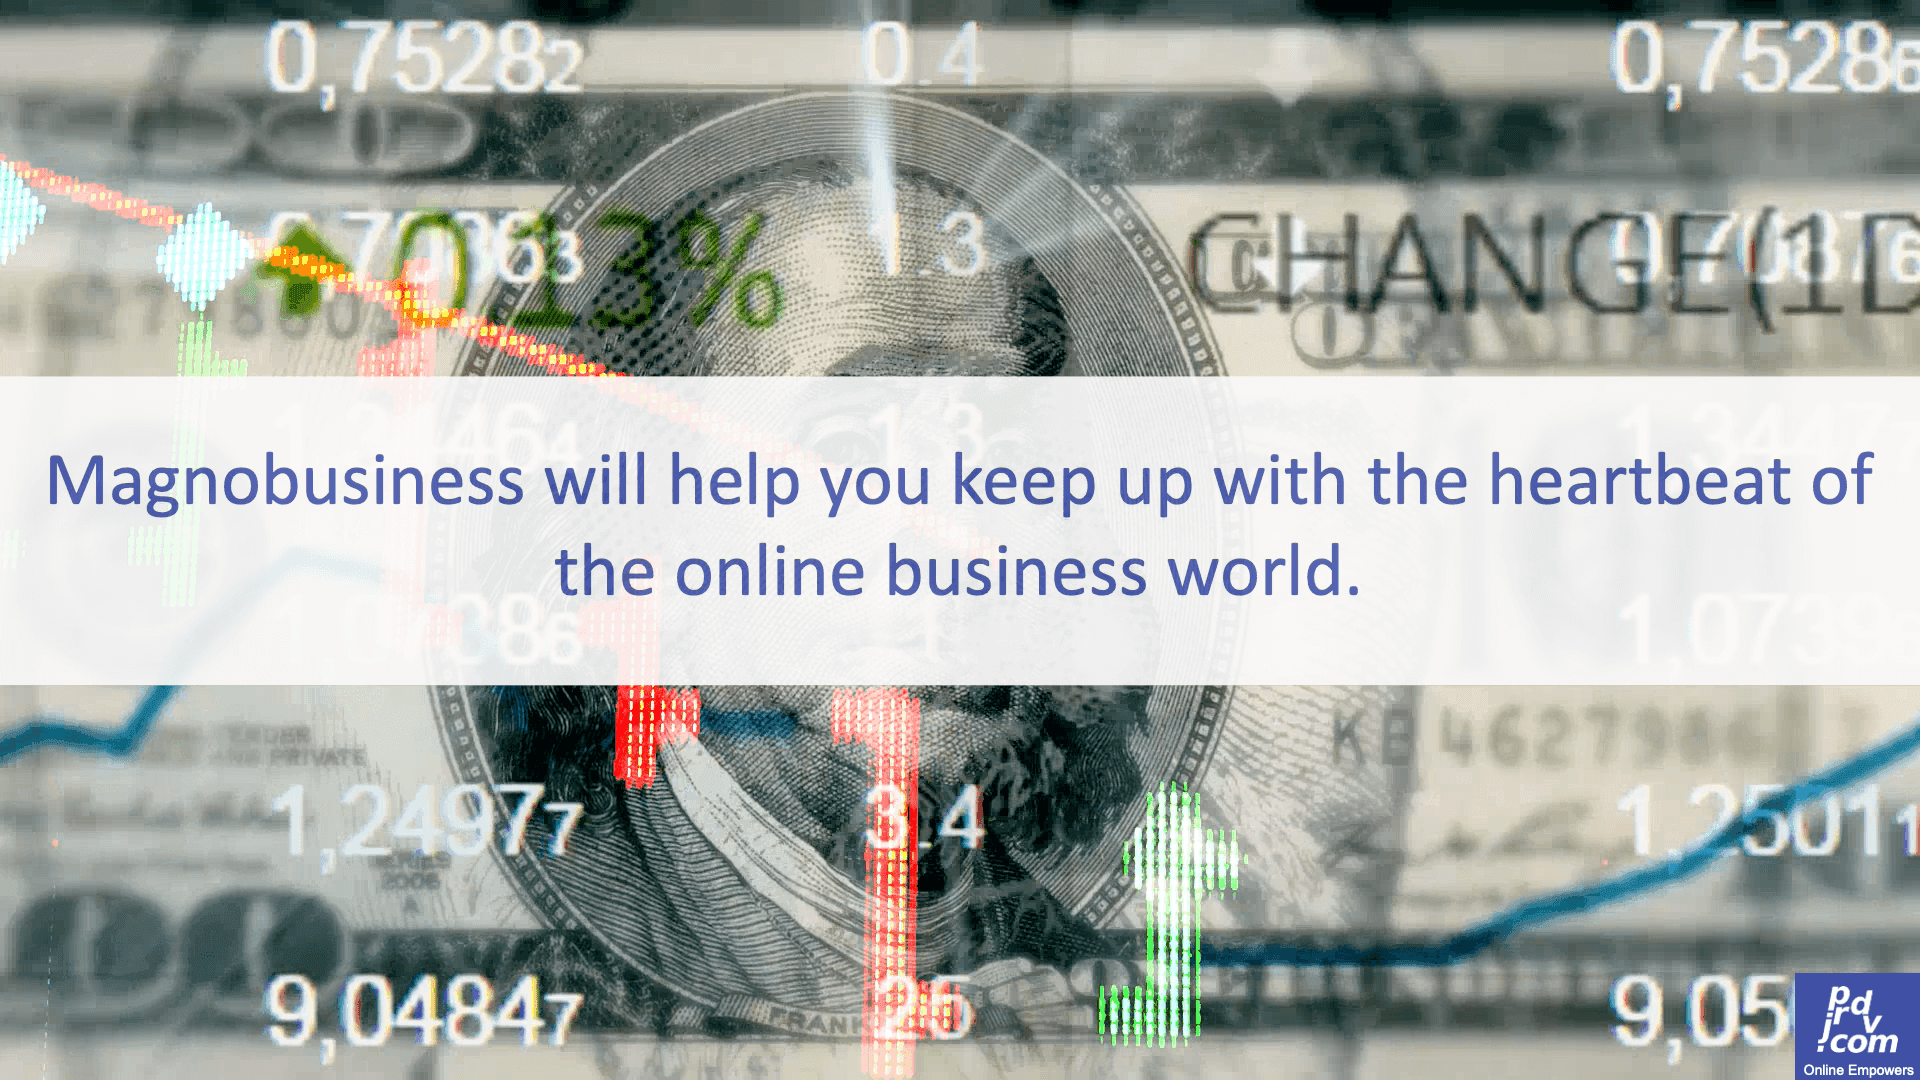 Magnobusiness will help you keep up with the heartbeat of the online business world.